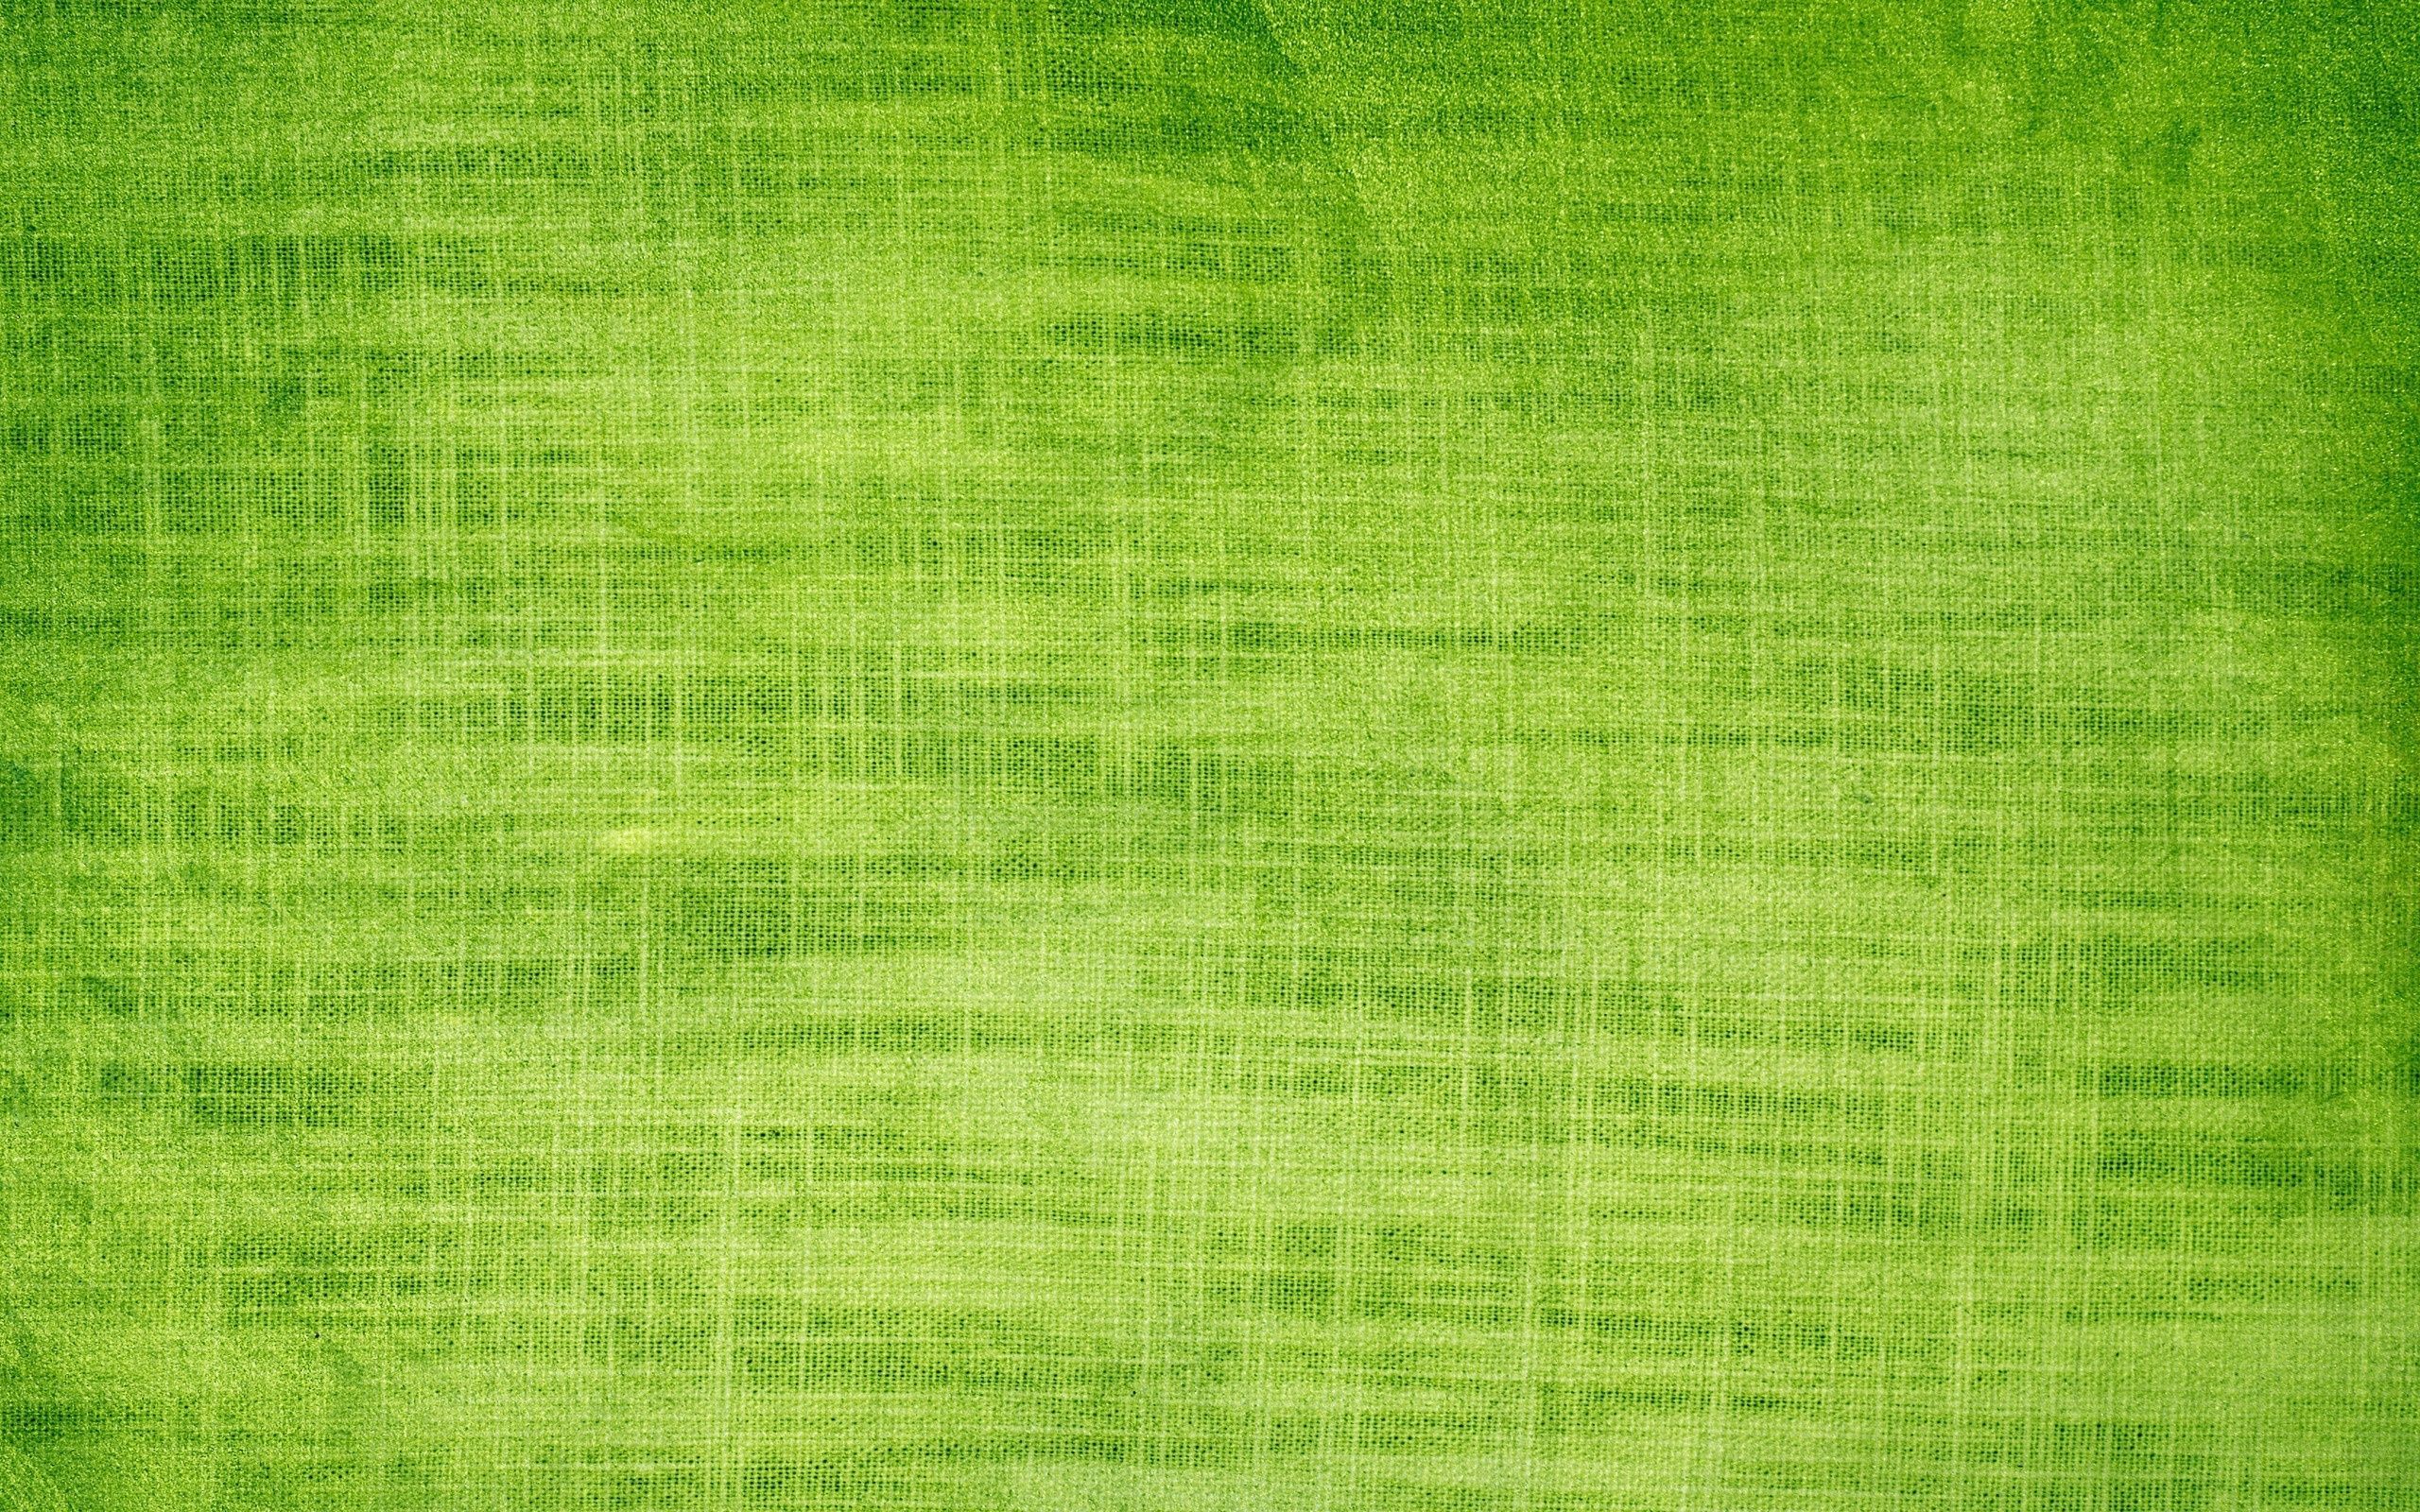 Bright green background wallpapers and images - wallpapers ...